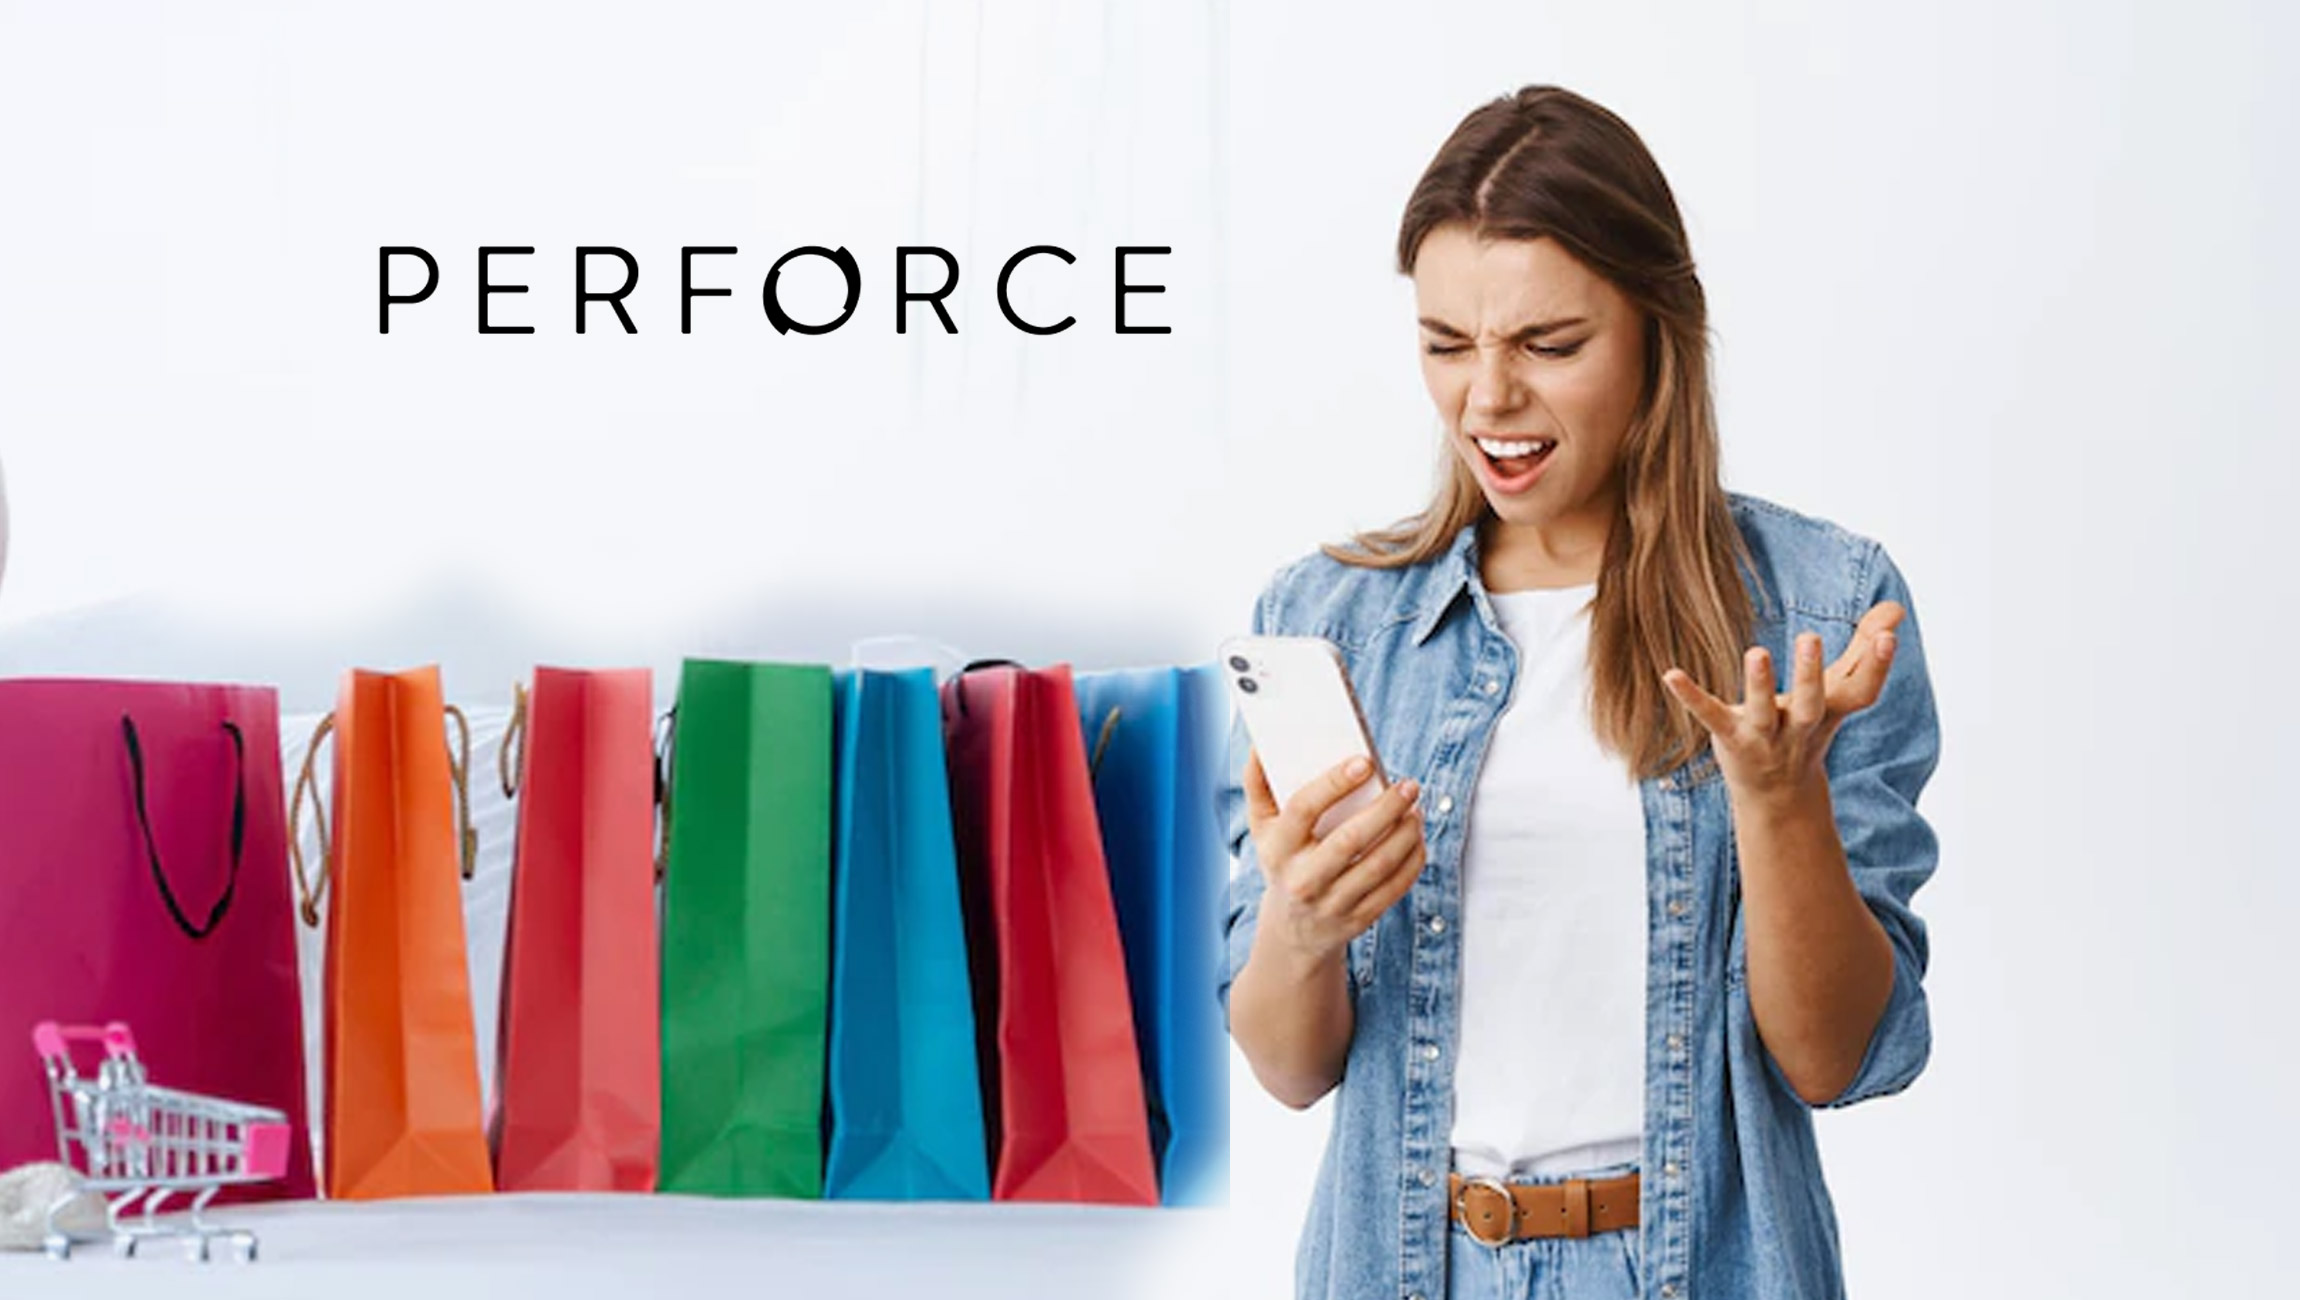 Perforce Research Finds 68% of Online Shoppers Have Felt Like Throwing Their Phone Against the Wall When a Shopping App Crashes